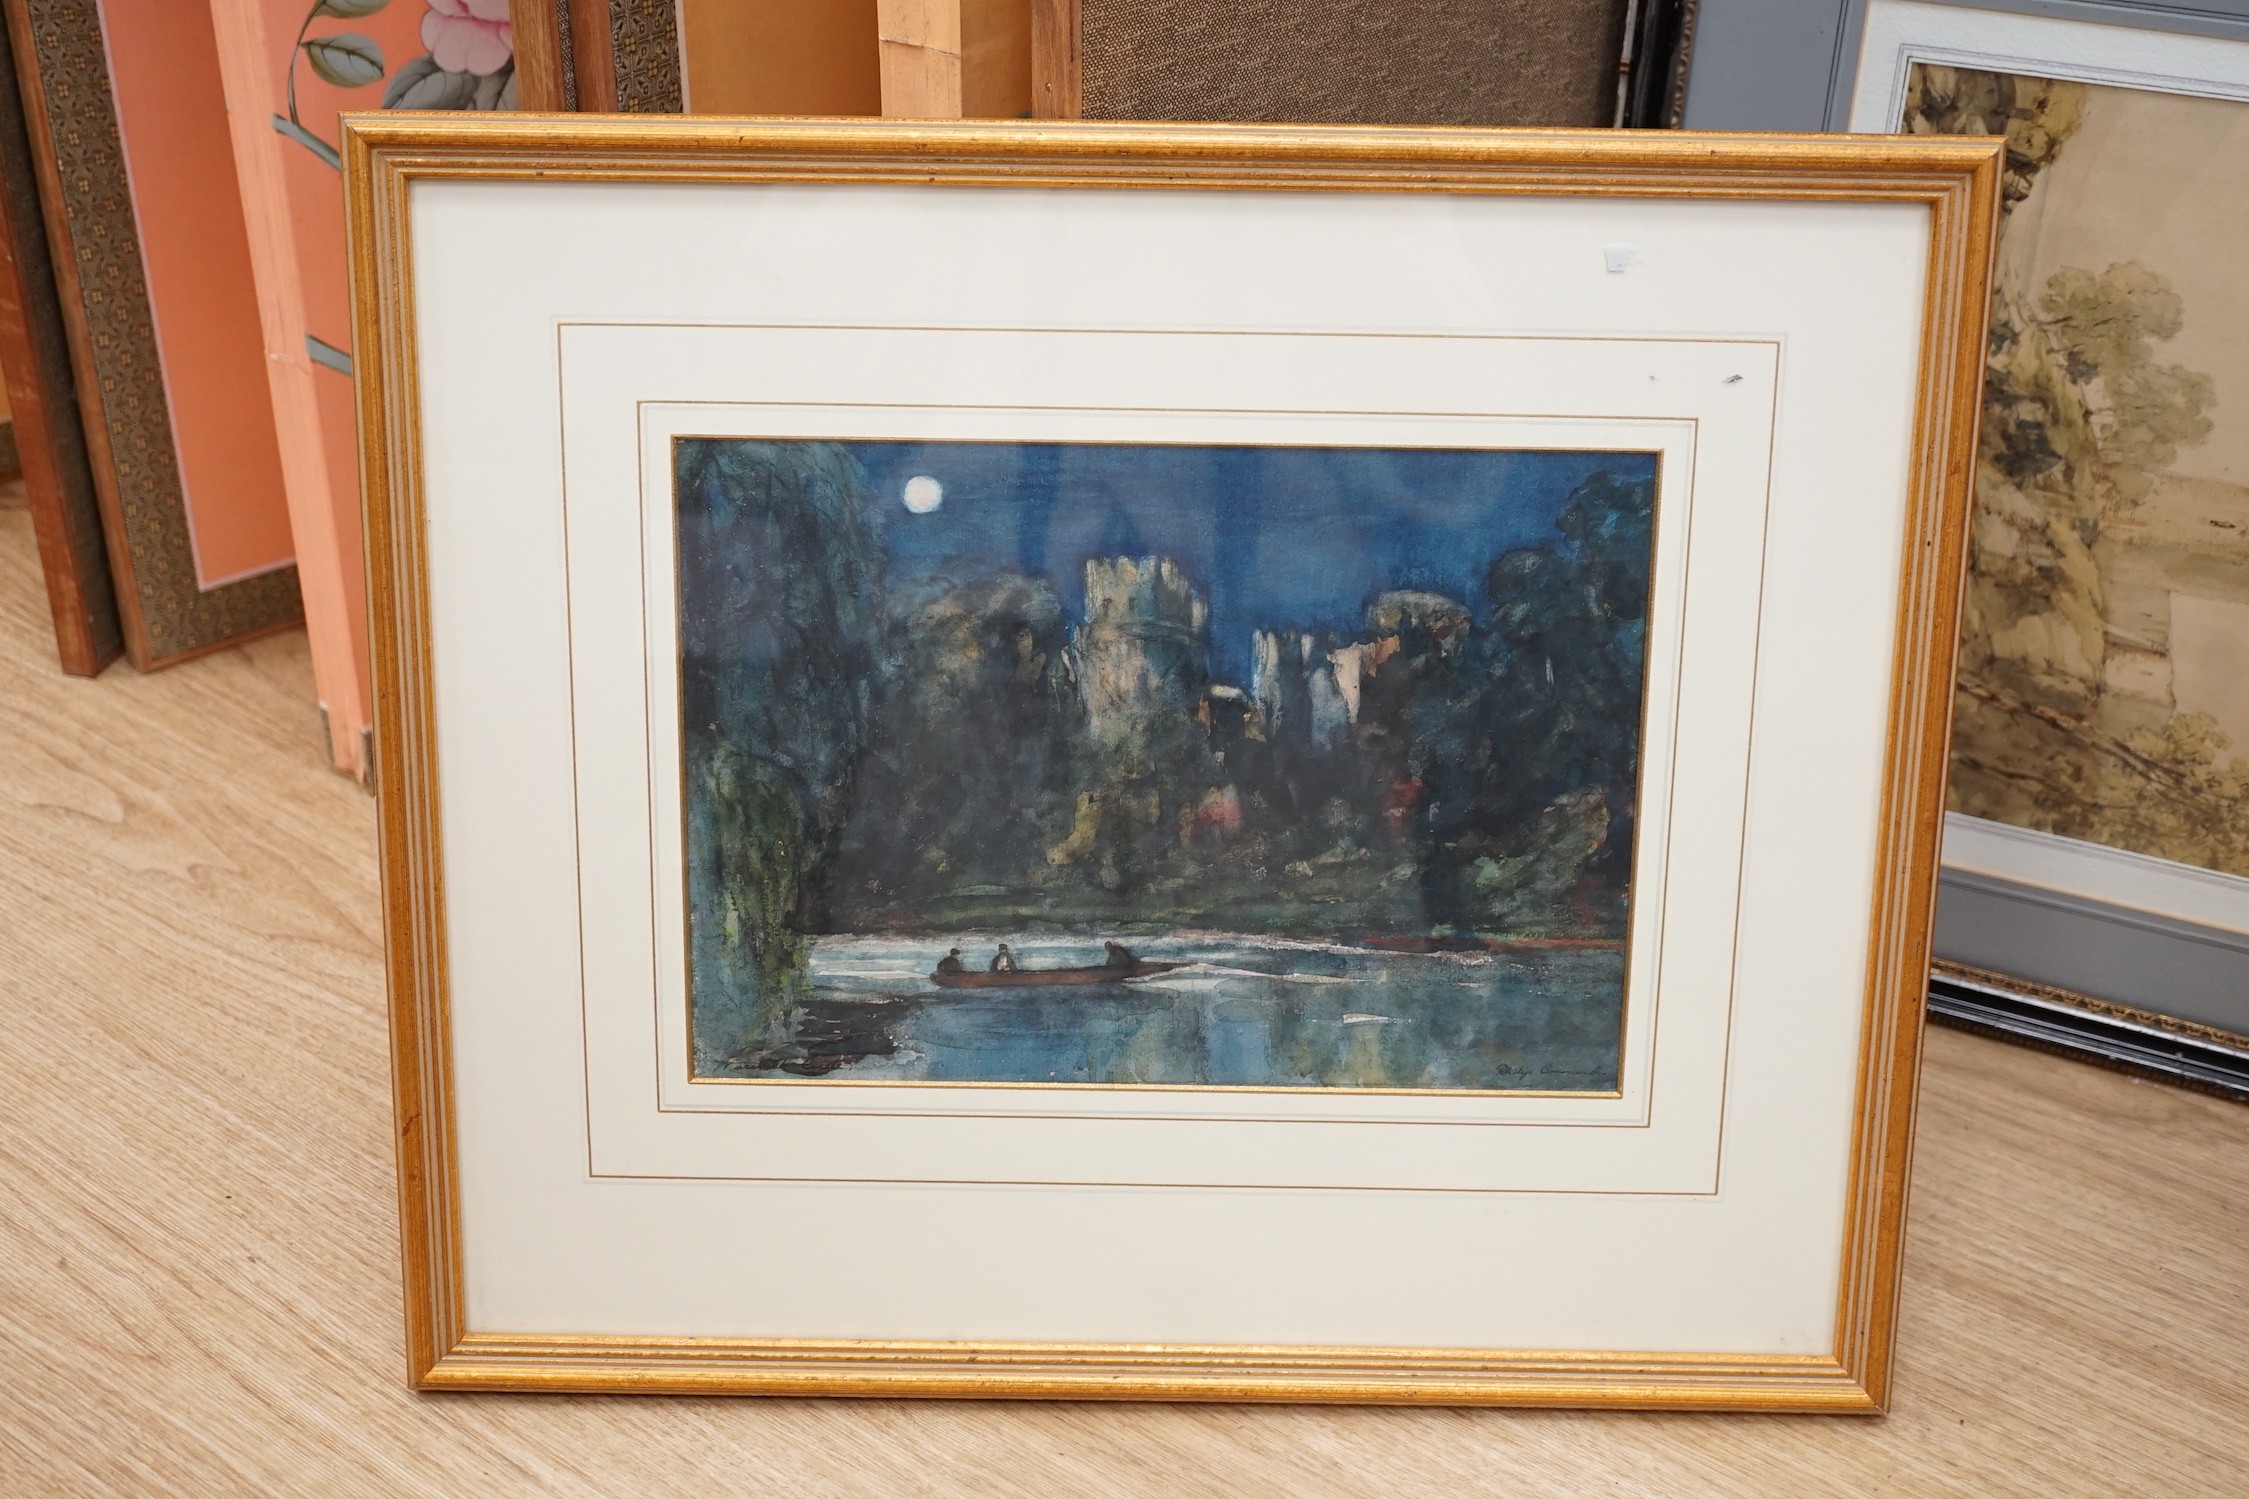 Philip Connard (1875-1958), watercolour, Moonlit scene with figures in a punt and a castle, signed, 23 x 33cm